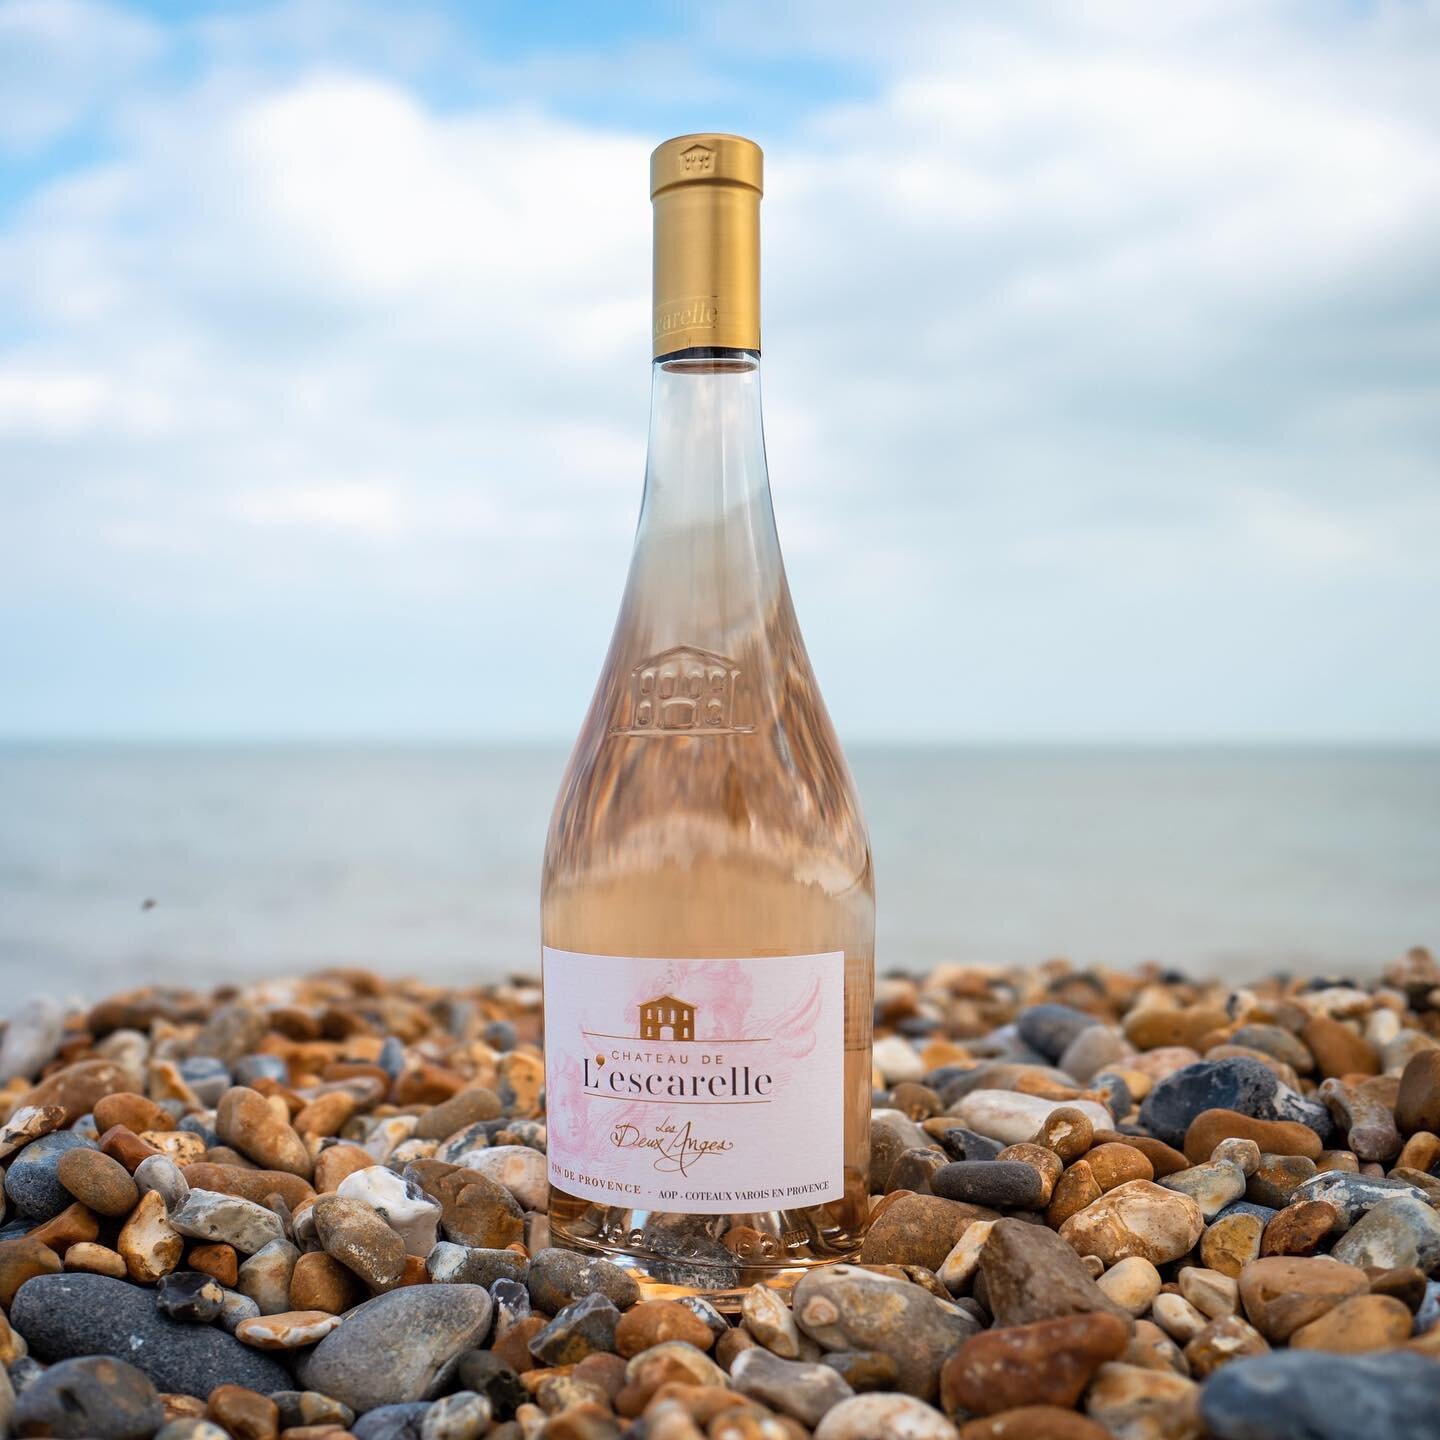 The wine to have stock of this summer is this lovely organic Provencial&nbsp;Ros&eacute; from a top producer, great as an aperitif, or with fish and grilled meats. Buy a case online or in store at @vindinista #summerchoice